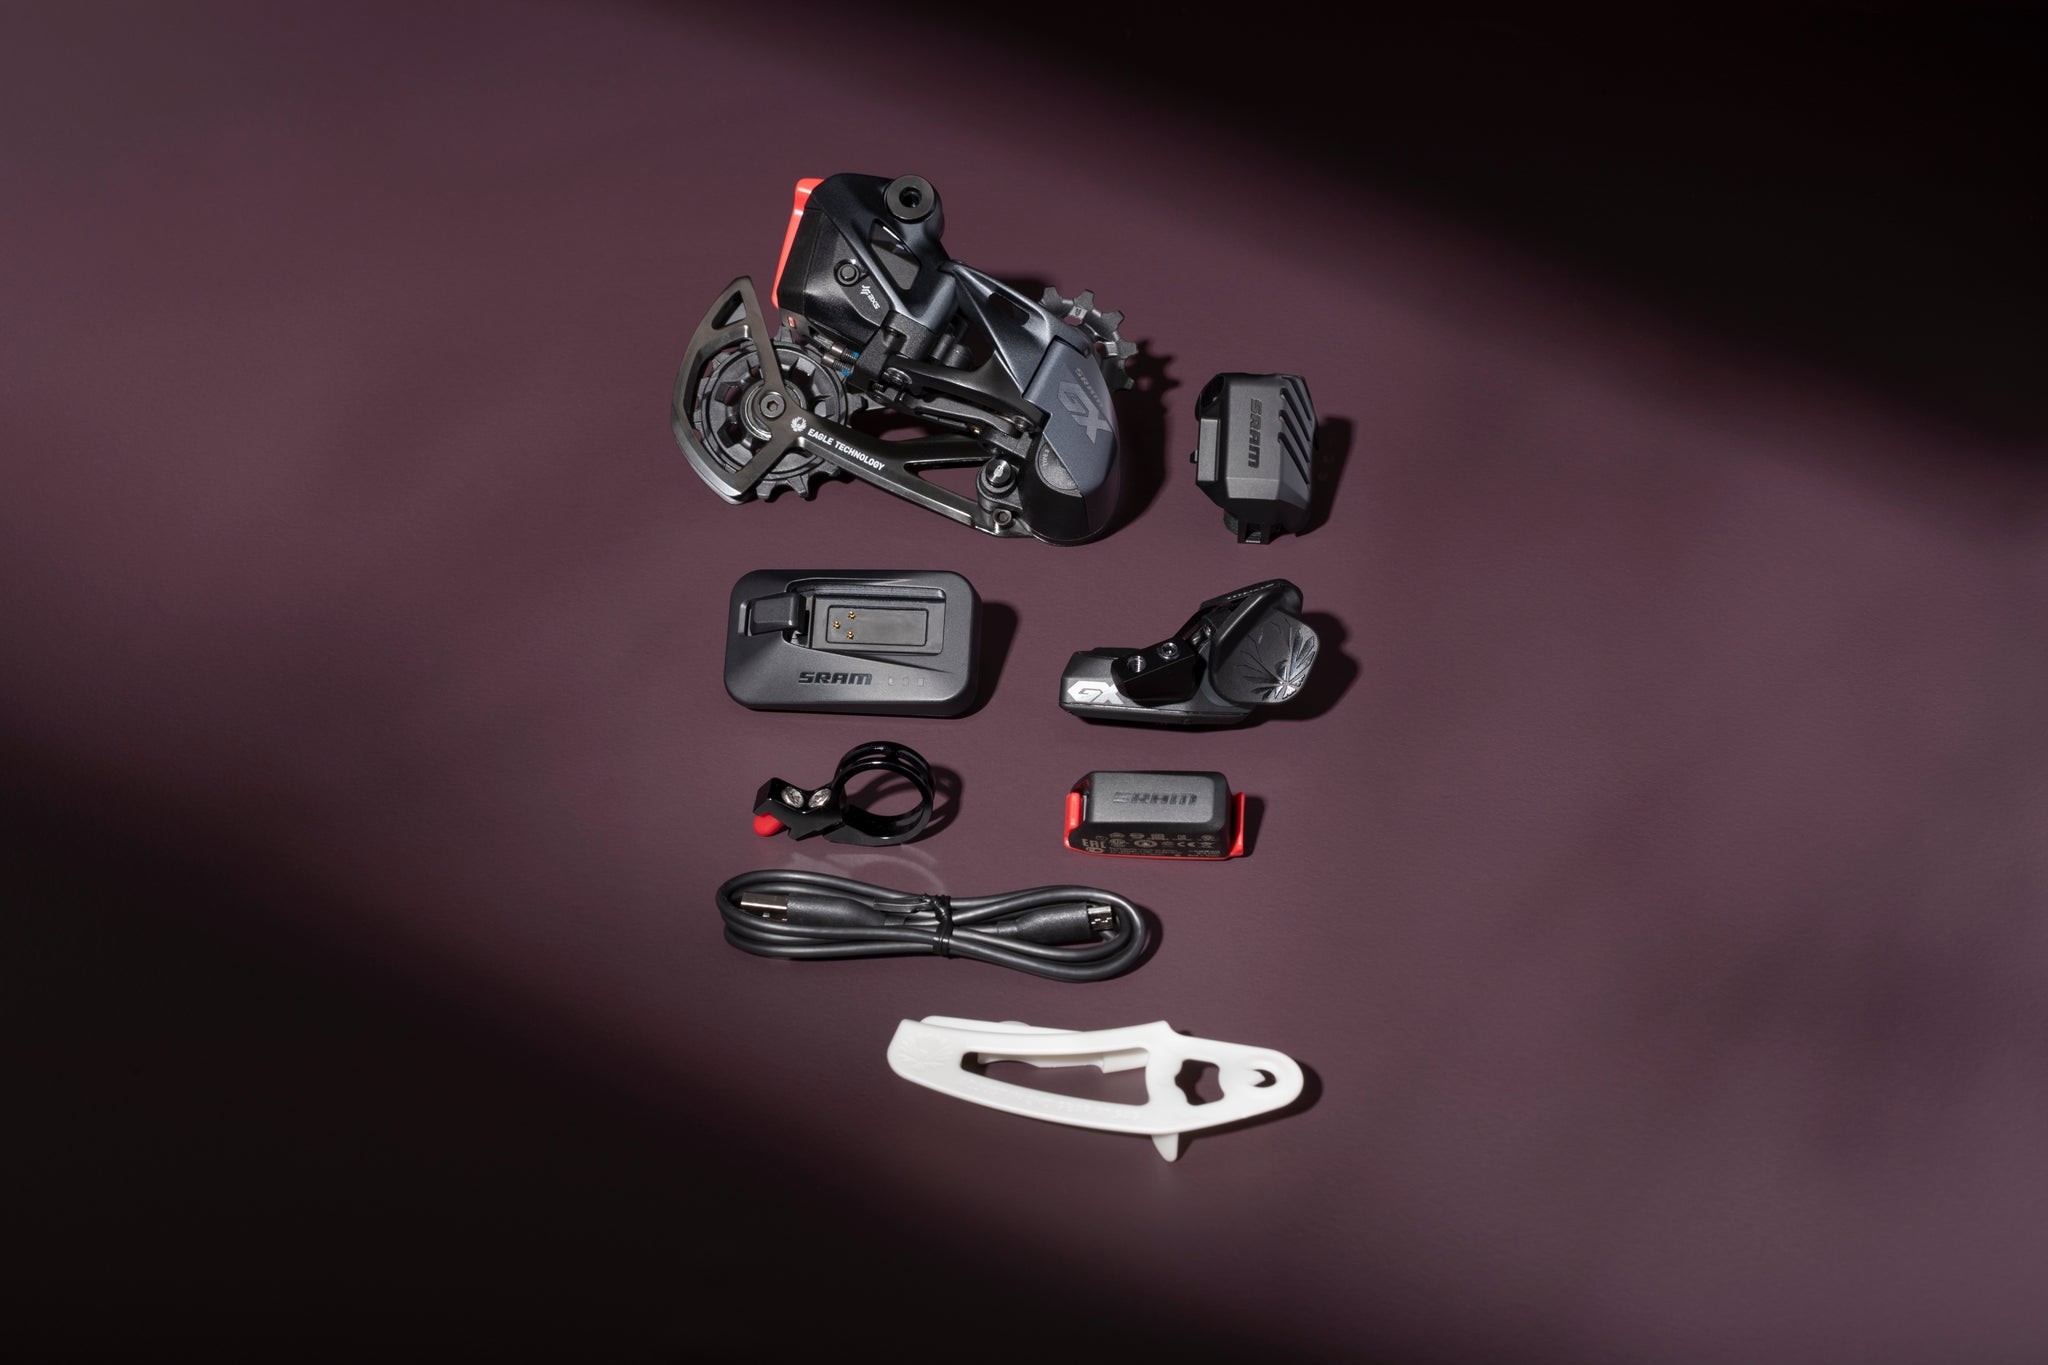 SRAM GX Eagle AXS upgrade kit first look review